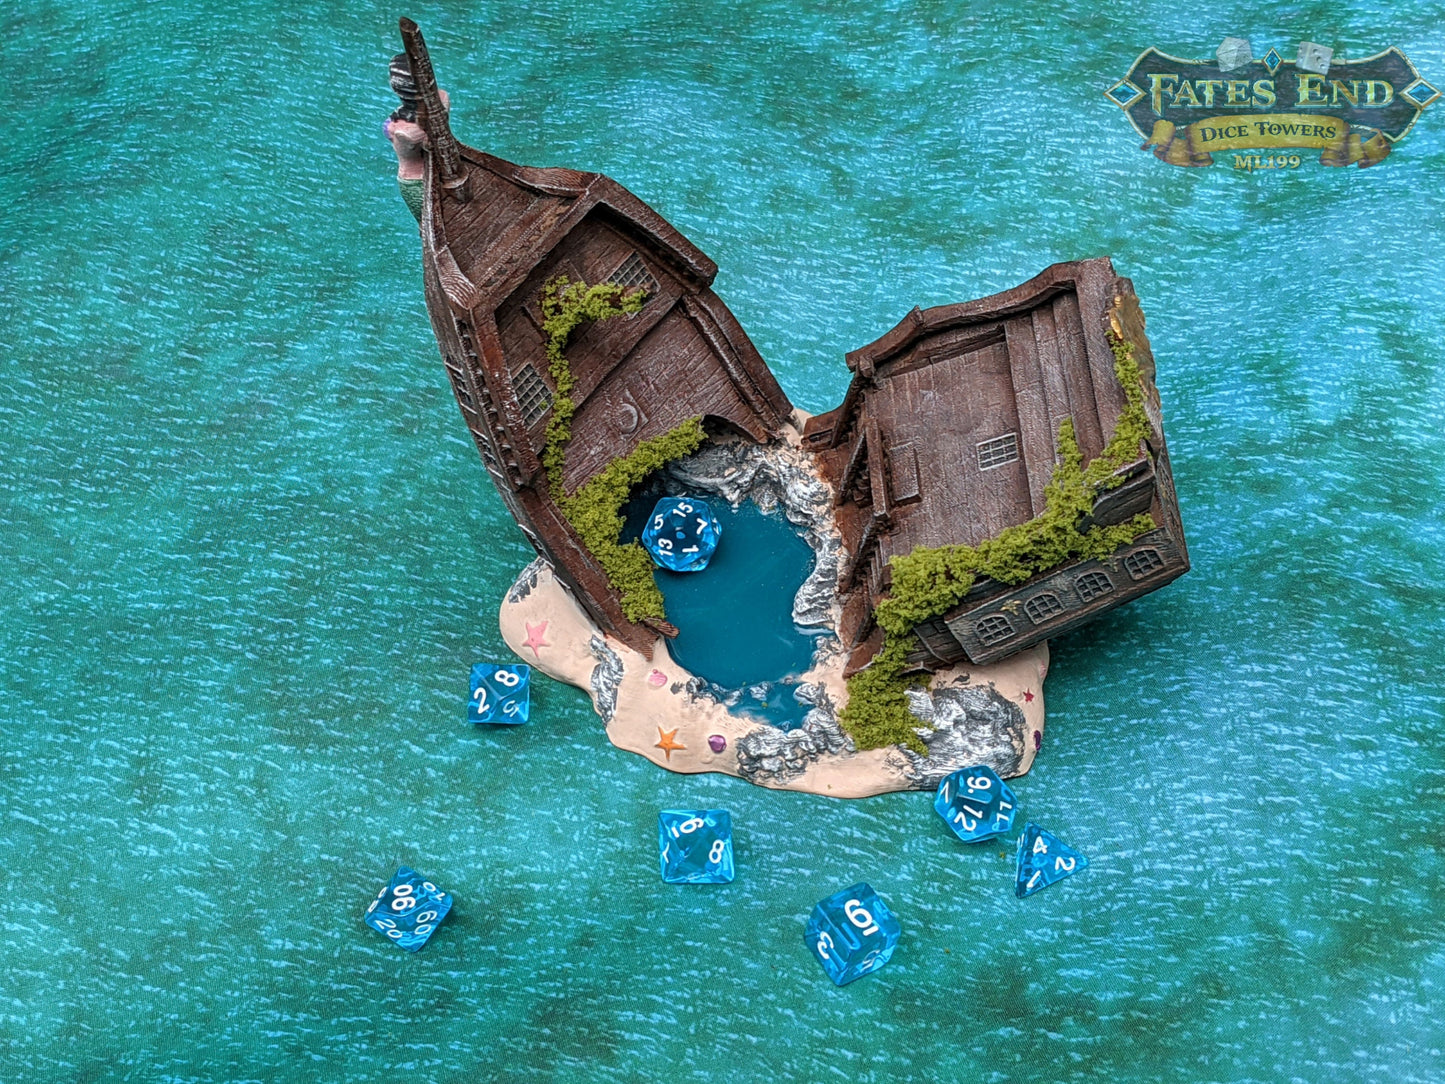 Pirate Ship 3D Printed Dice Tower - Fate's End Collection - Tabletop RPG Gaming Fantasy Cosplay - Sail Uncharted Waters of Fate in Flair .